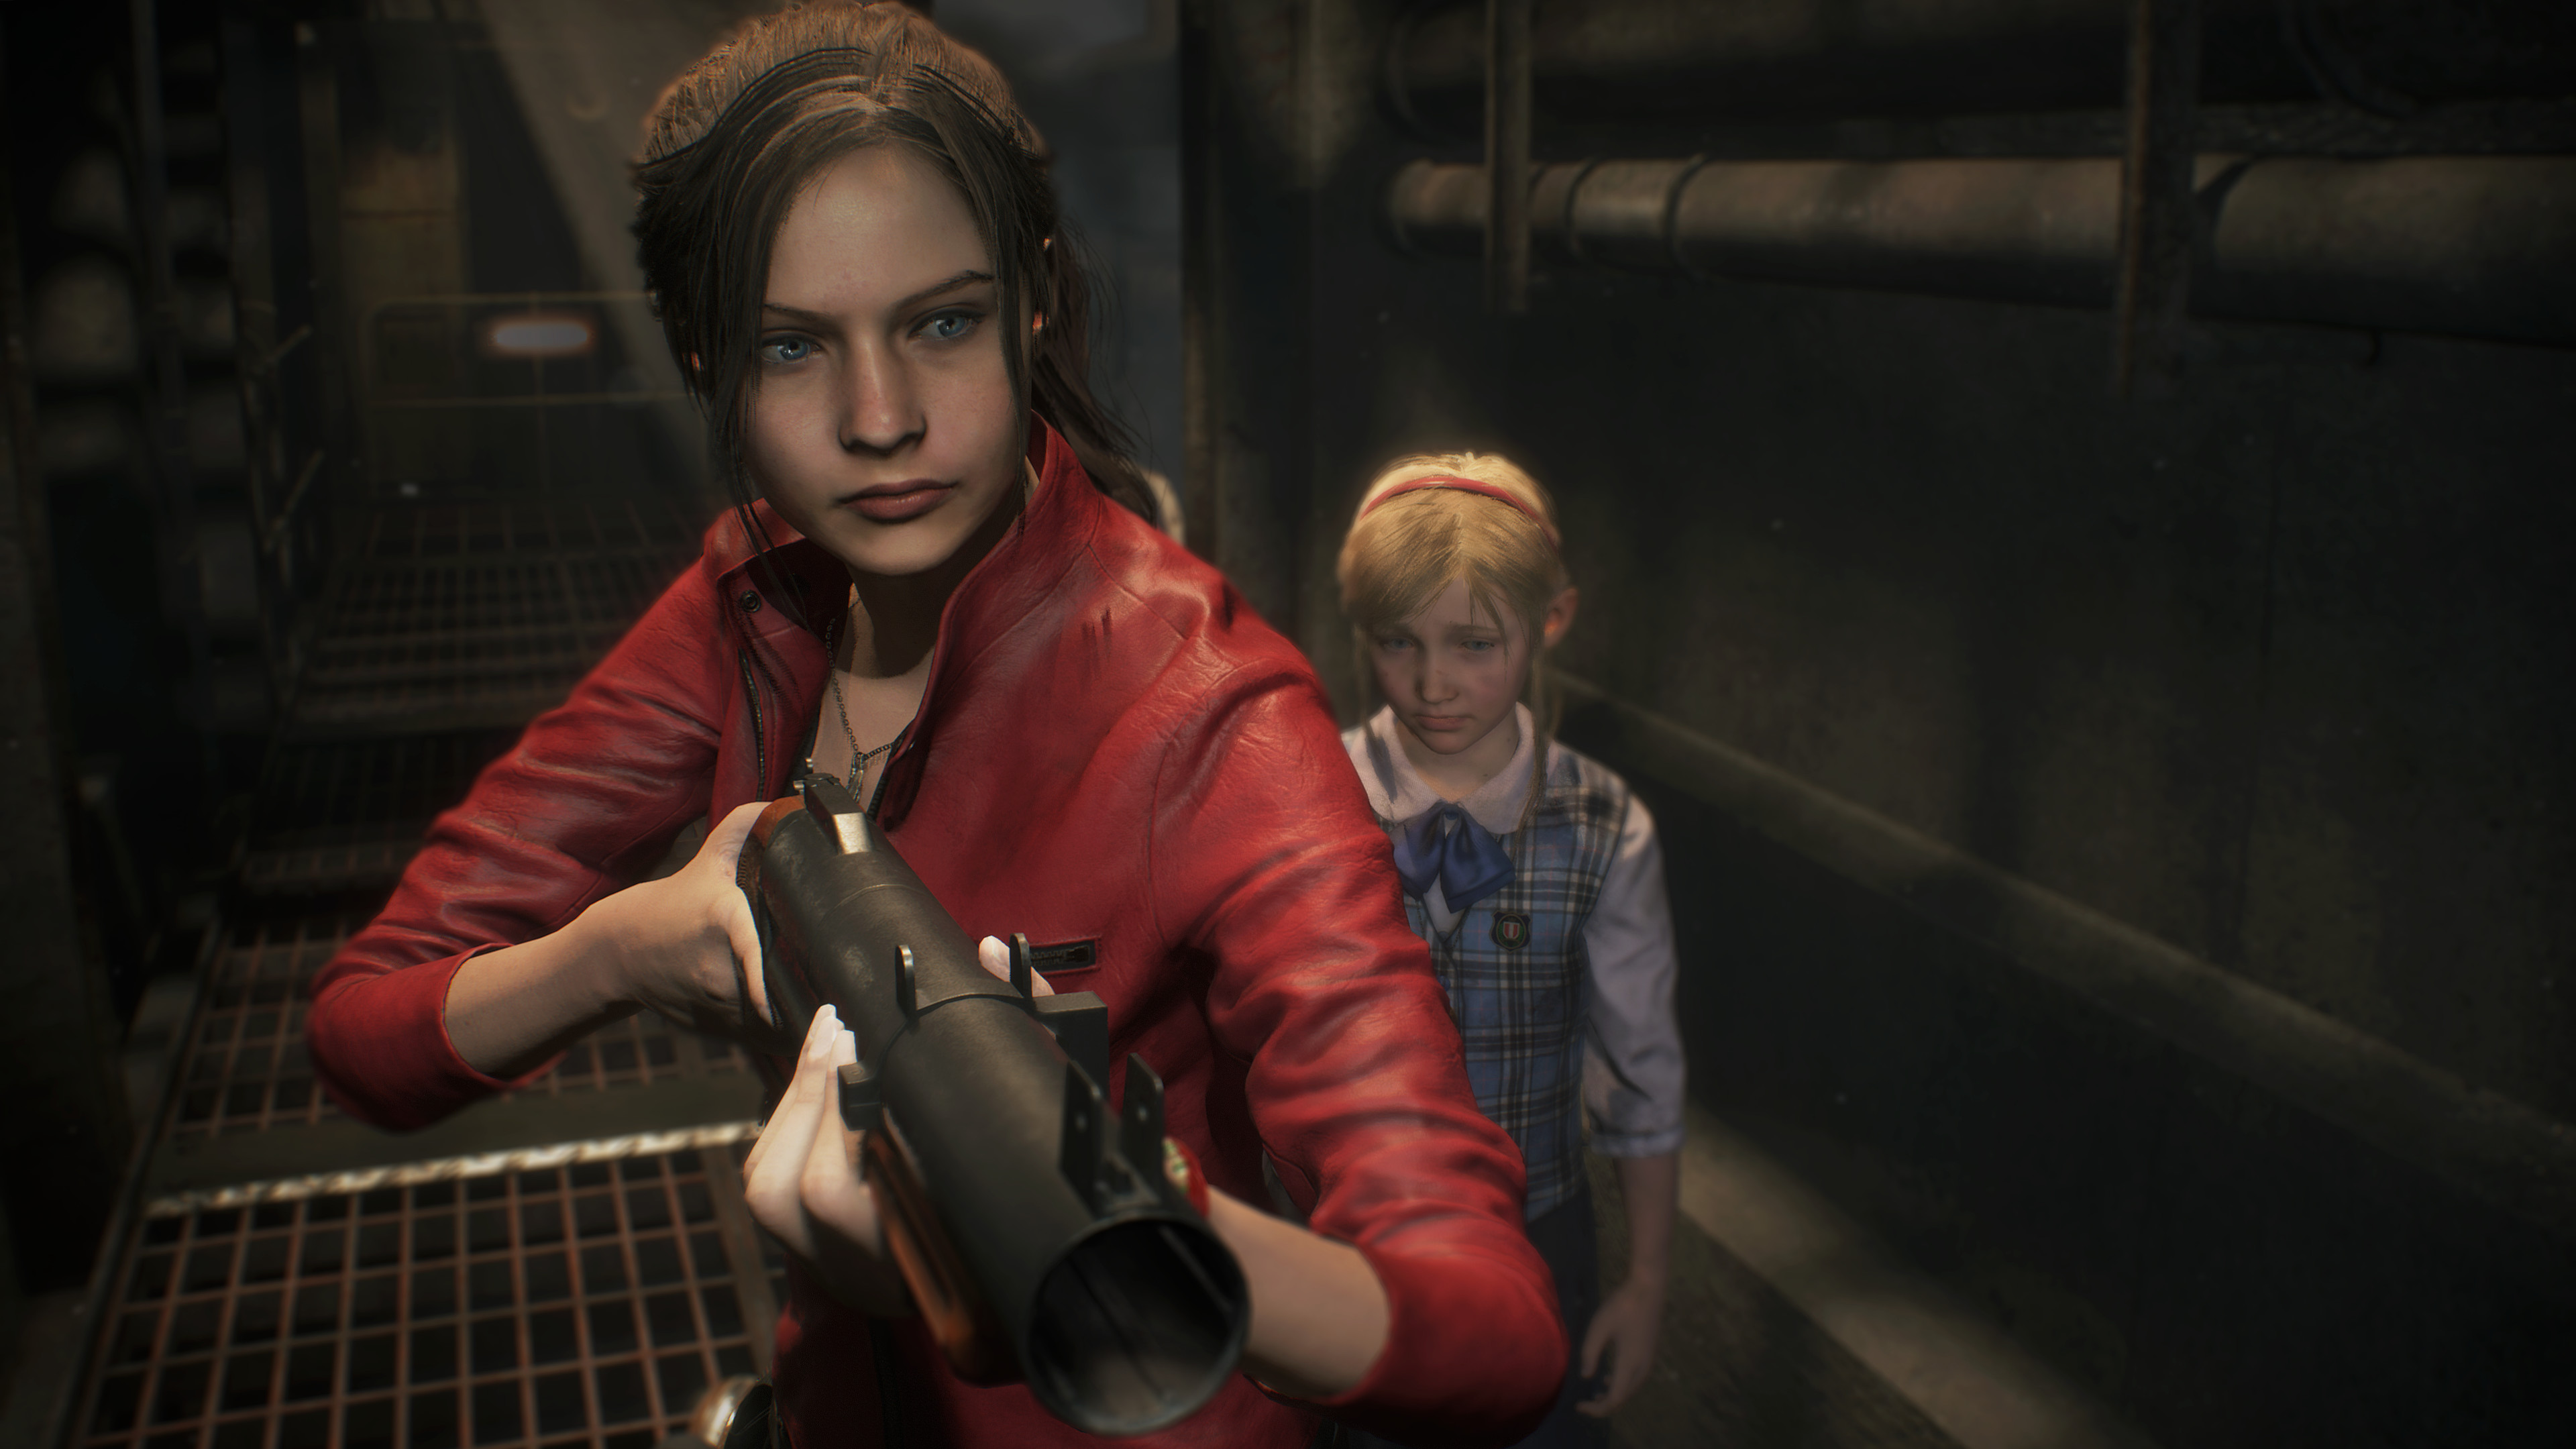 3840x2160 Resident Evil 2 - Claire & Sherry 4k Ultra HD Wallpaper | Hintergrund |   | ID:942285 - Wallpaper Abyss